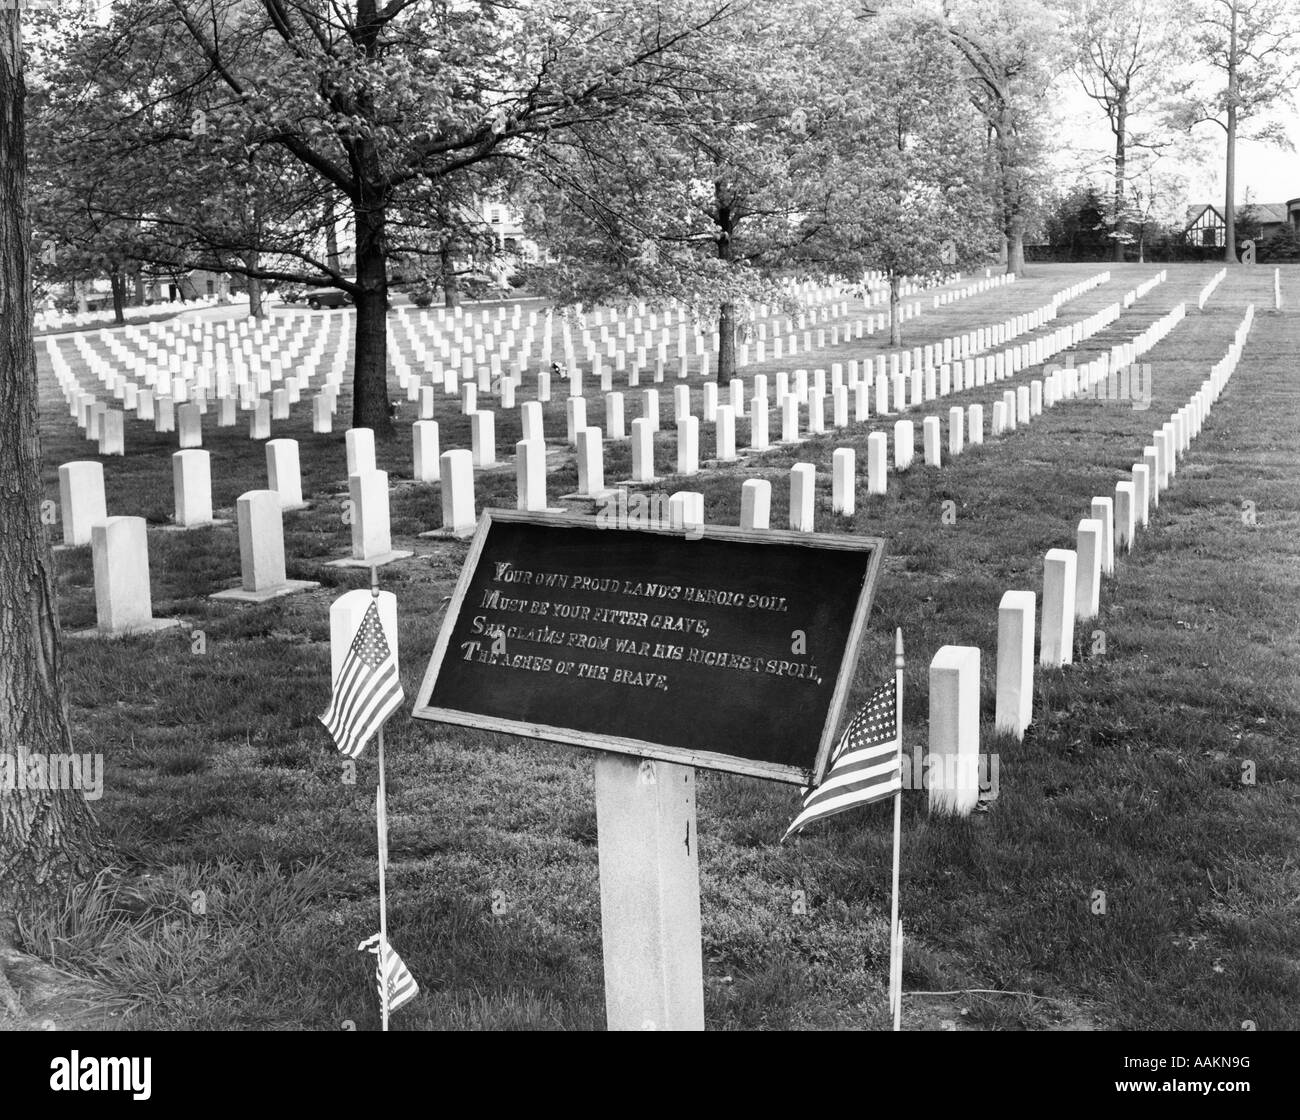 NATIONAL CEMETERY IN PHILADELPHIA WITH COMMEMORATIVE PLAQUE & AMERICAN FLAGS IN FOREGROUND Stock Photo